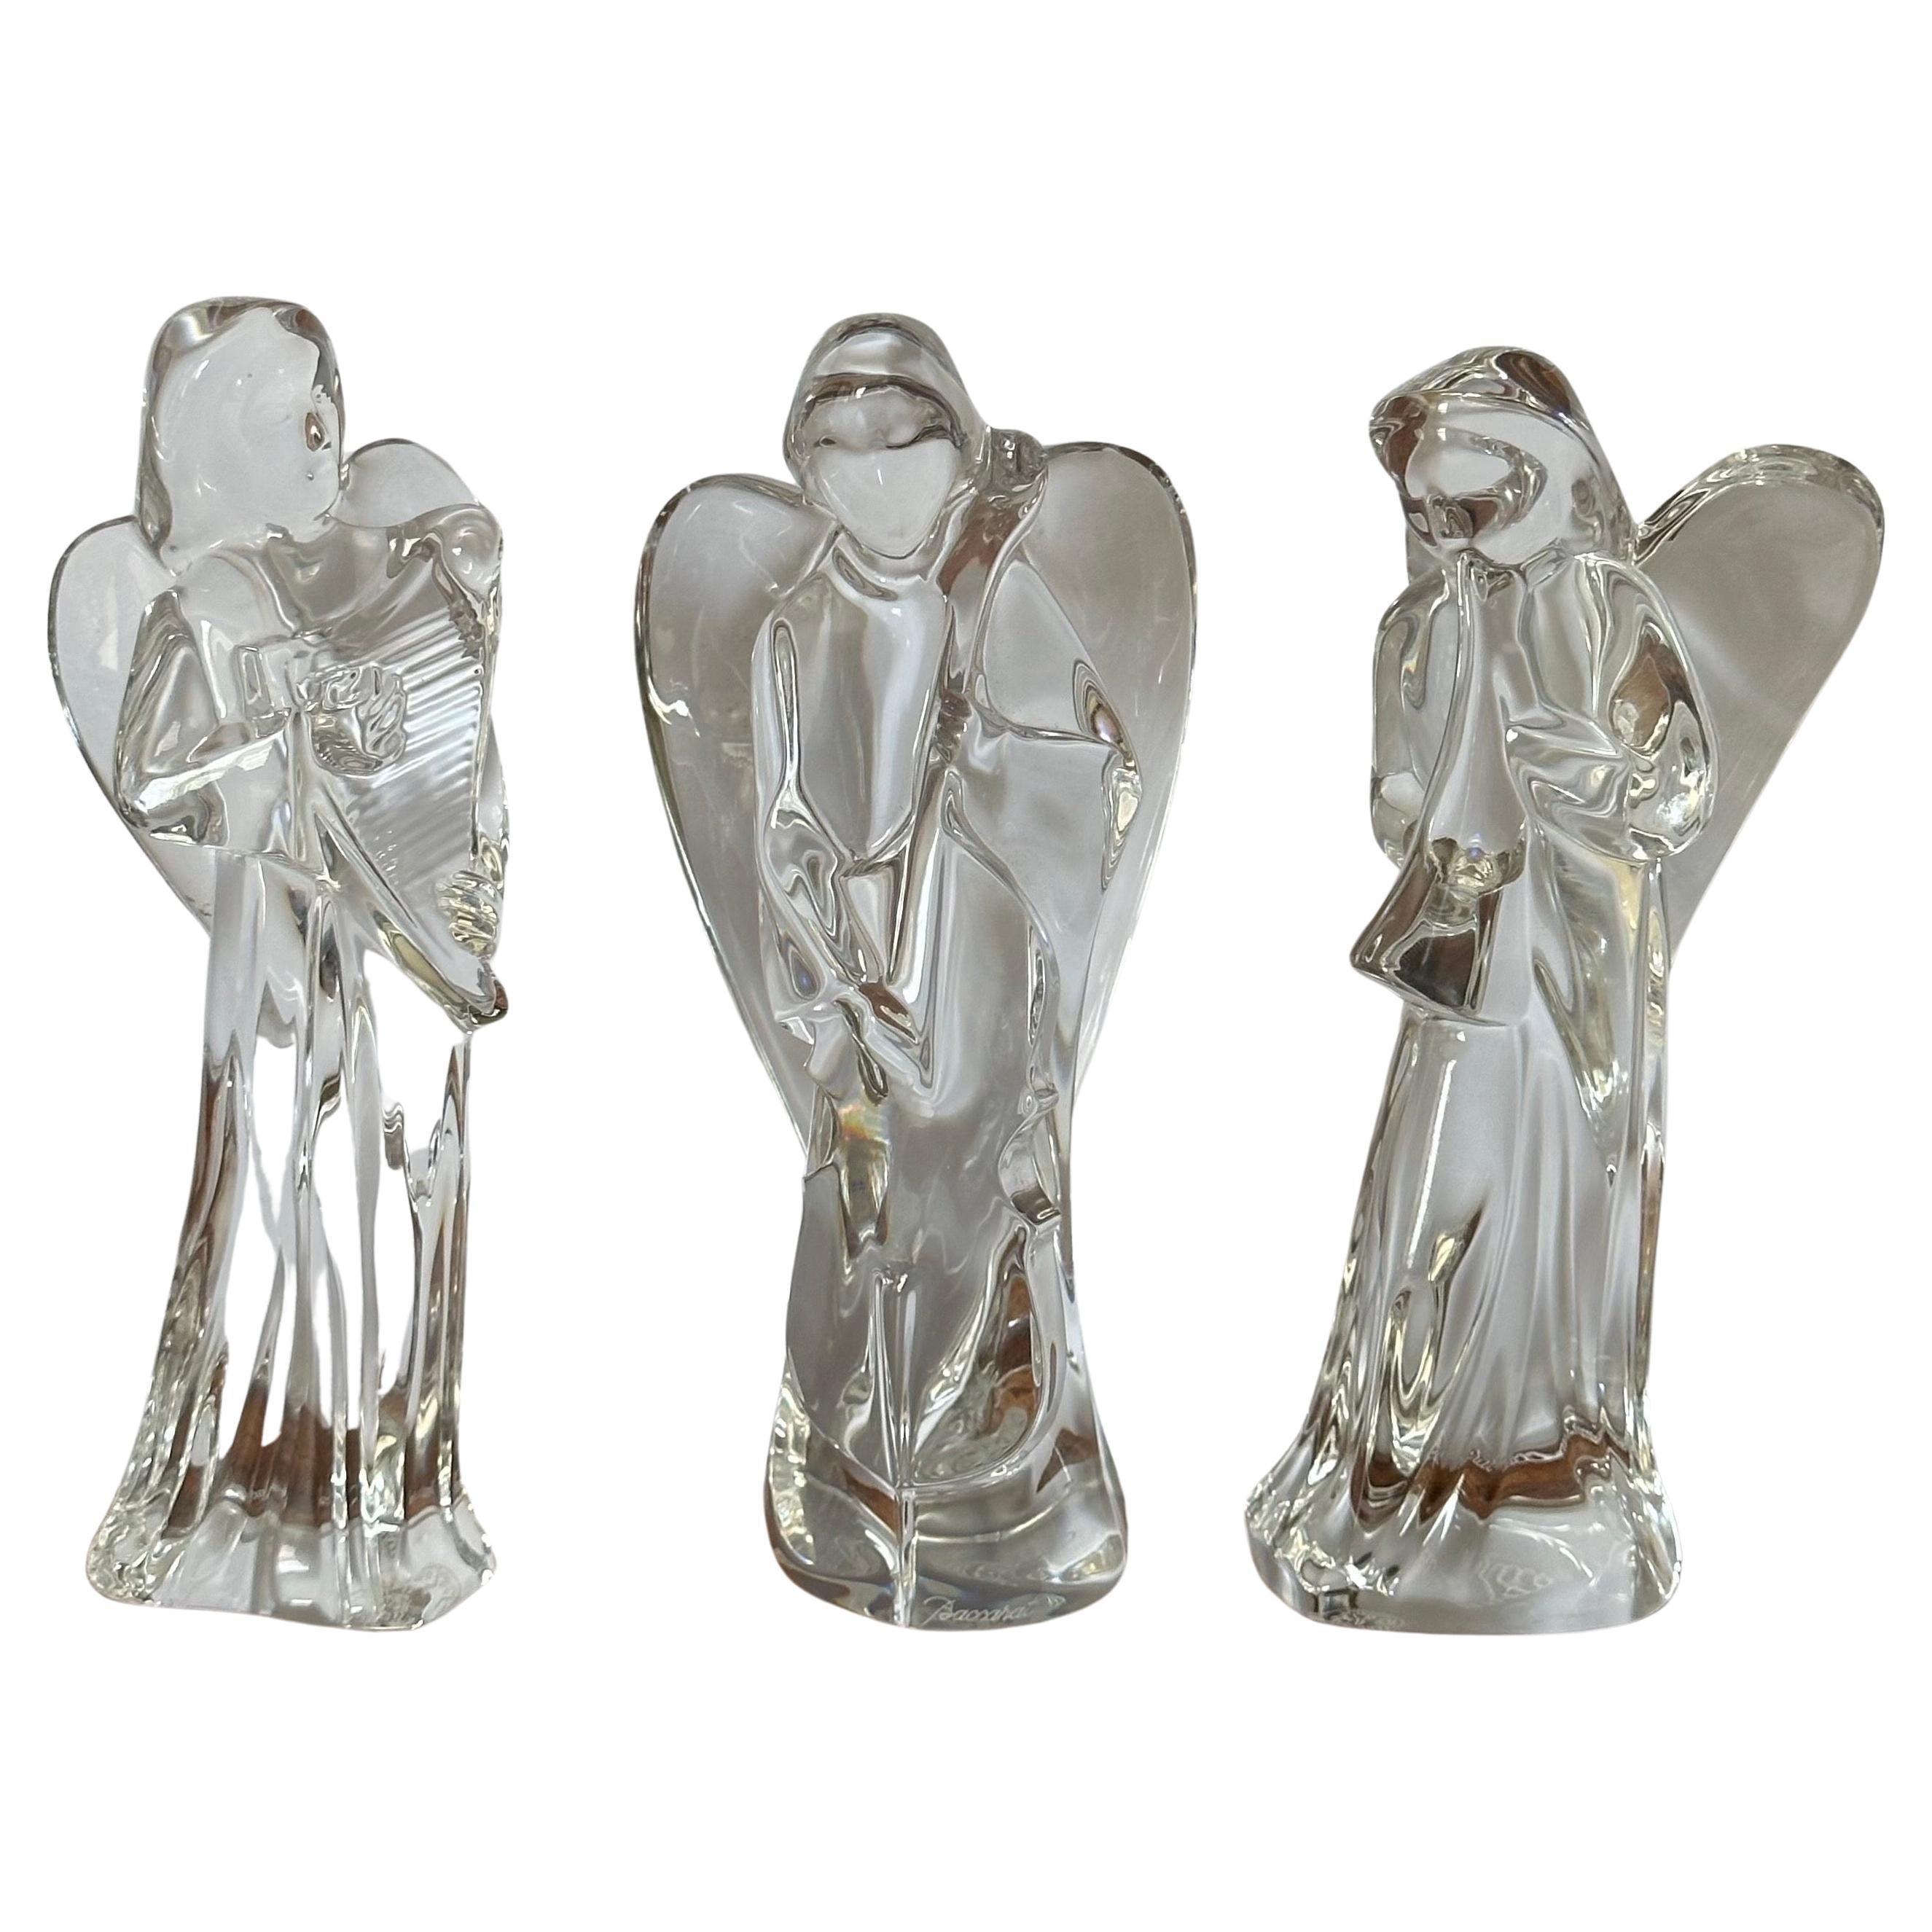 Gorgeous set of three crystal angels playing various instruments (harp, cello, horn) by Baccarat, circa 1970s. The sculptures are in very good condition and measures approximately 3